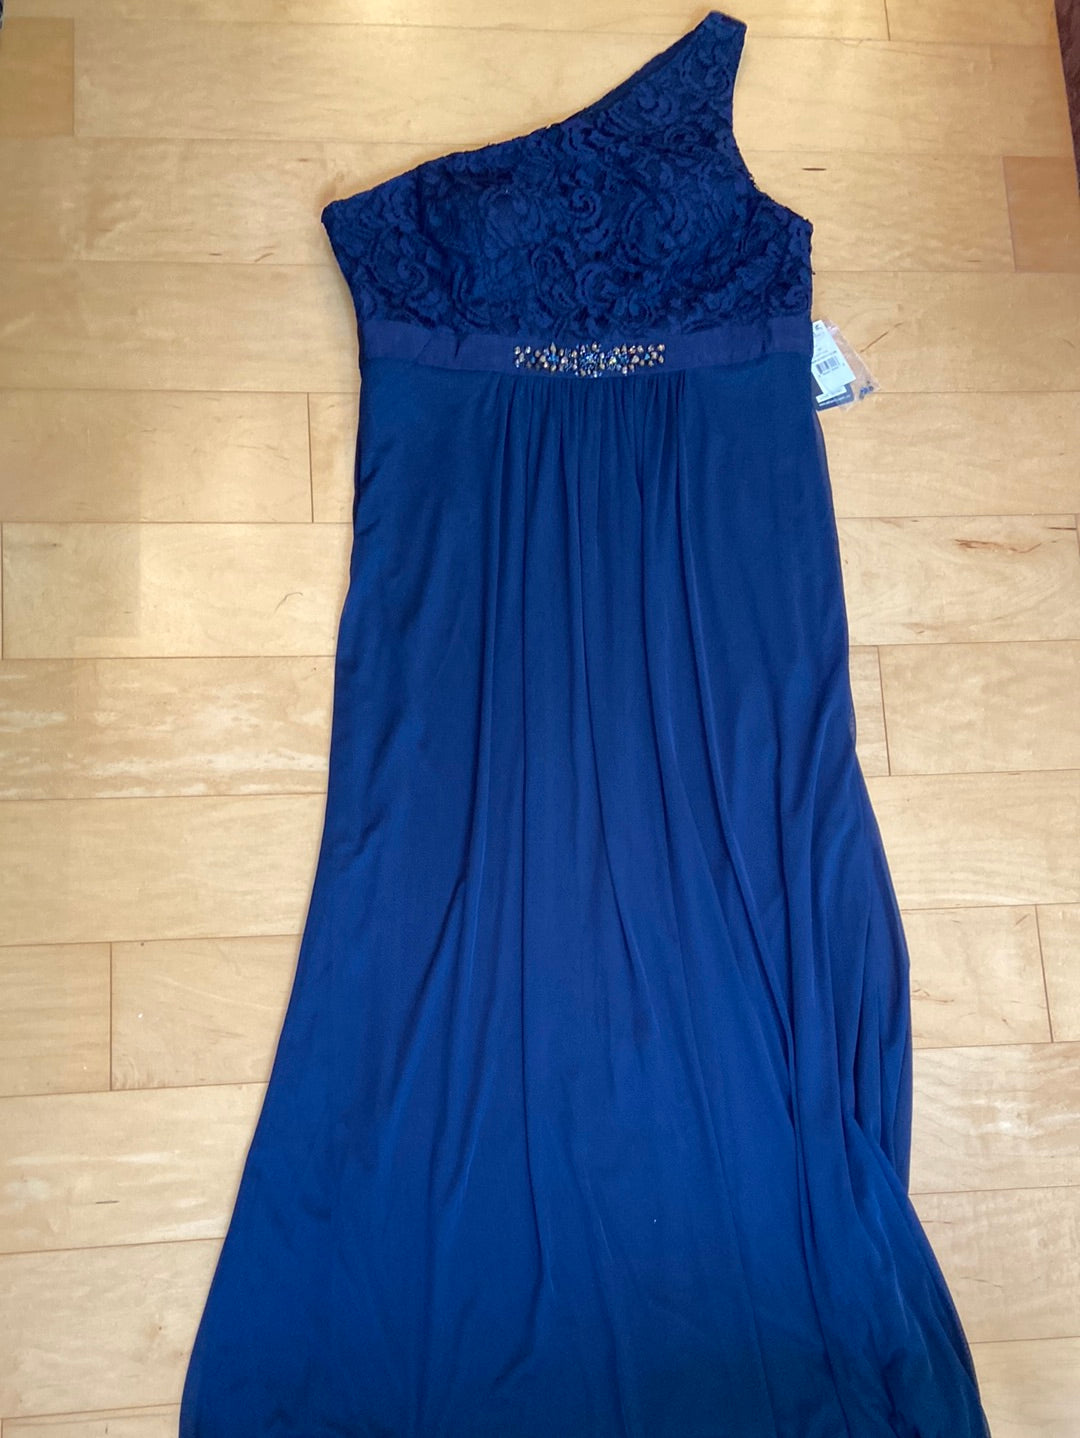 NAVY GOWN Adriana Papell Size 20